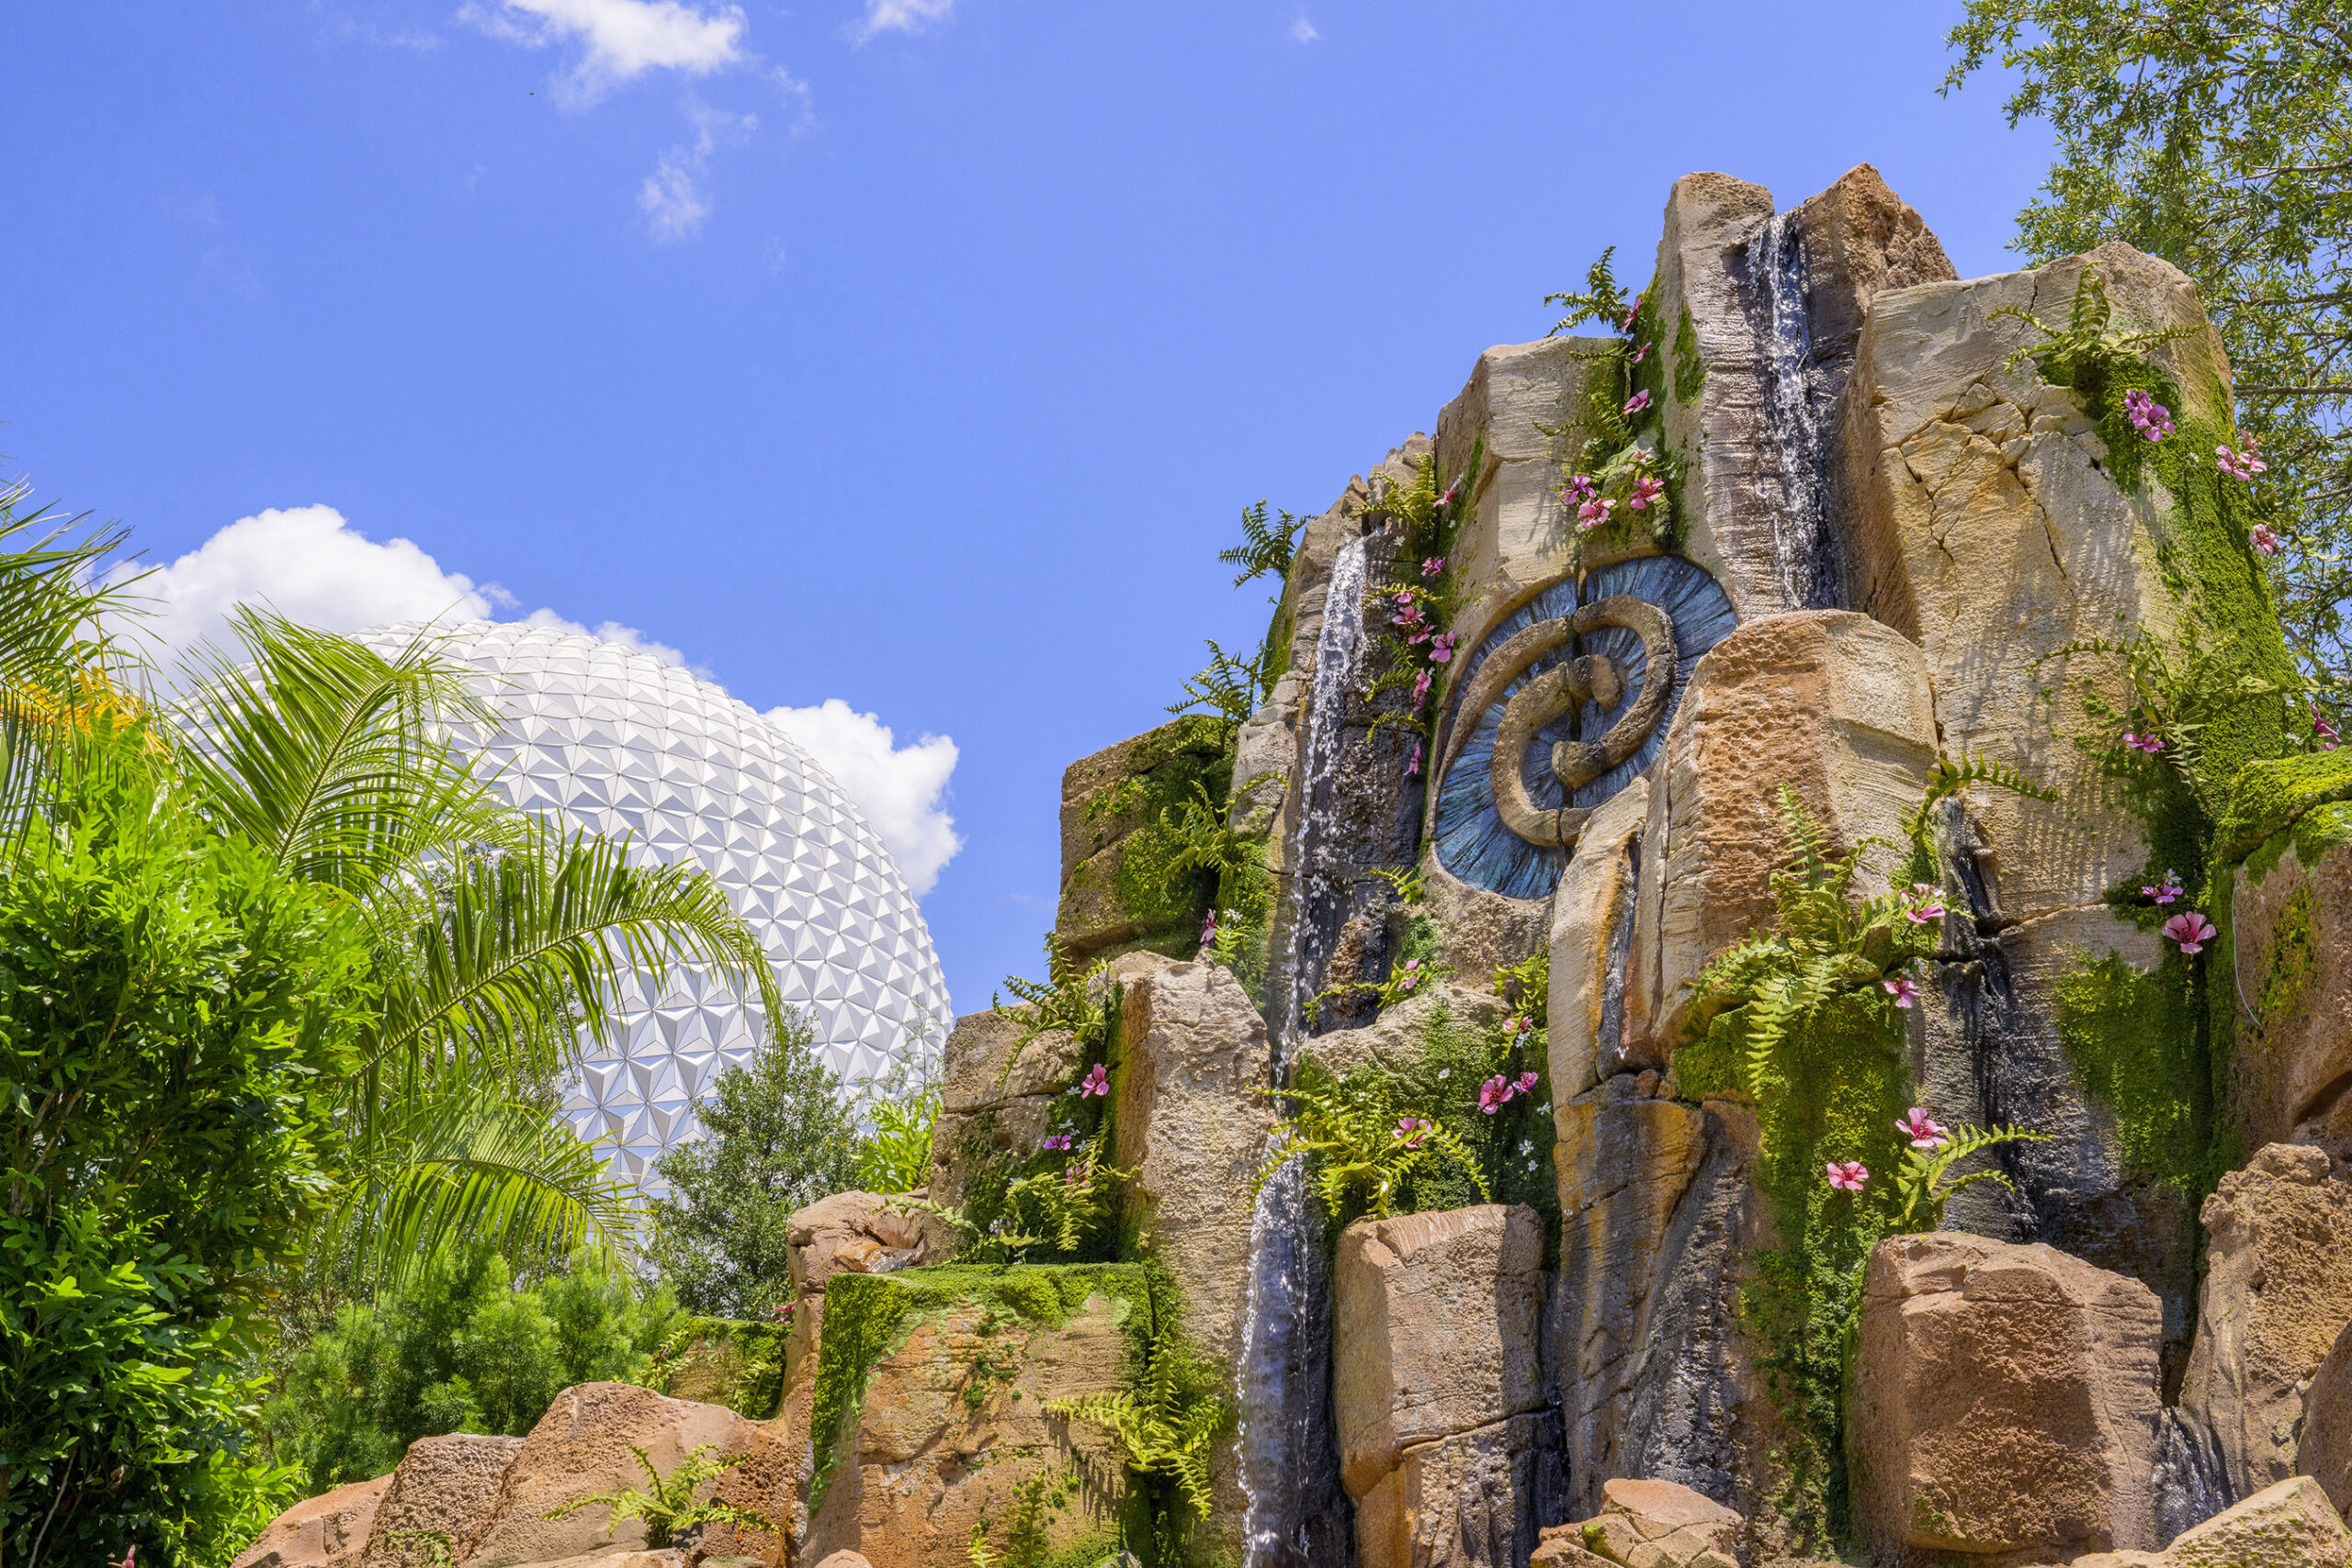 Journey of Water, Inspired by Moana will open on Oct. 16, 2023! Journey of Water is a new walk-through experience located within World Nature – the EPCOT neighborhood dedicated to understanding and preserving the beauty and balance of the natural world.